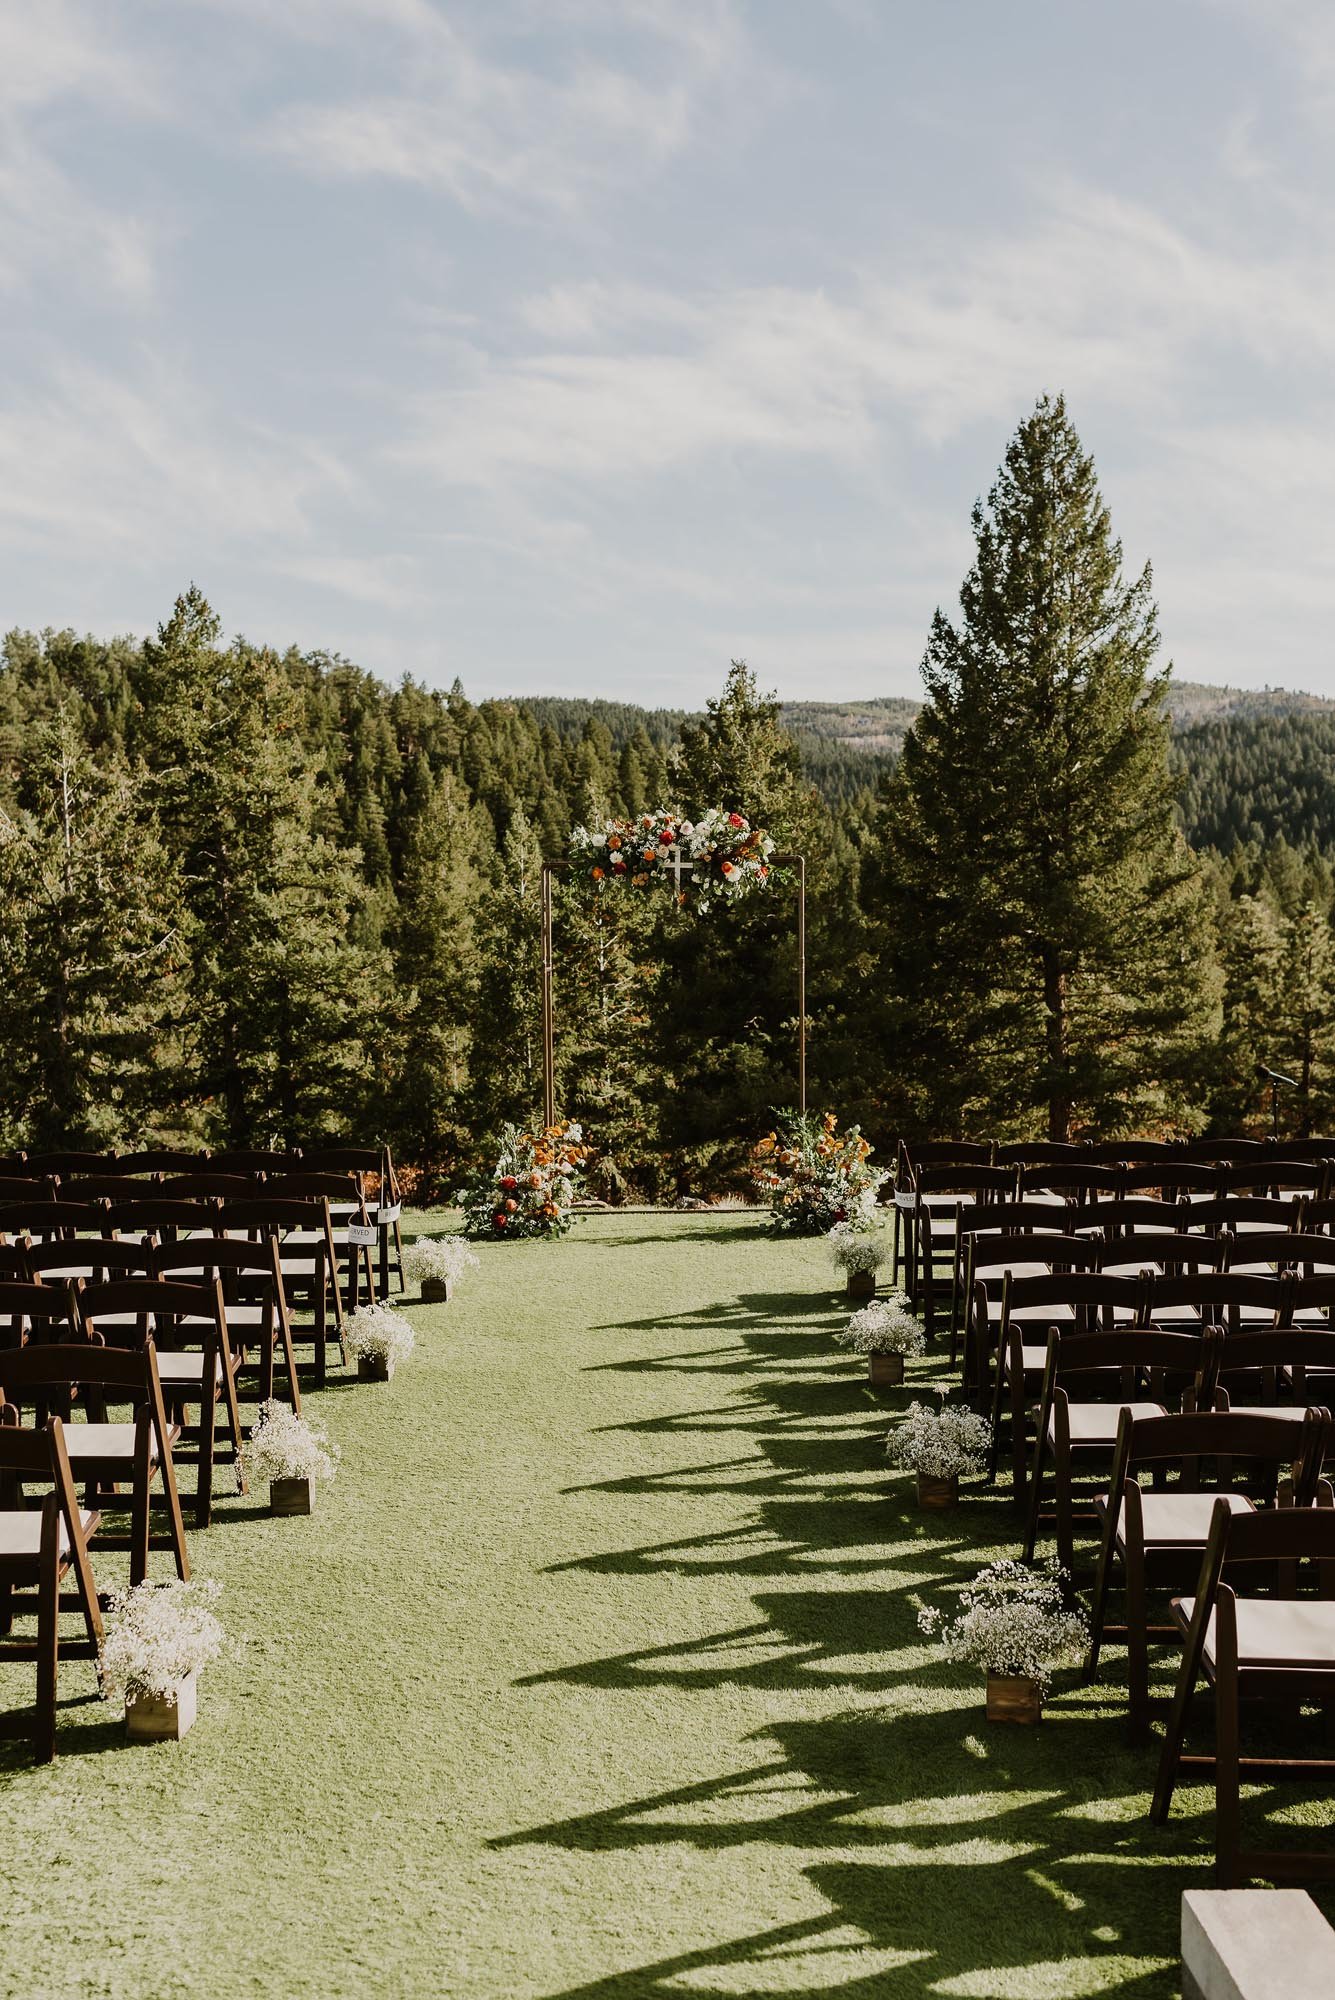  A lovely floral ceremony backdrop with florals in orange, rust and white sits perched on a hillside surrounded by evergreen trees. The aisles are lined with dark wooden folding chairs and floral arrangements made of babies breath. 